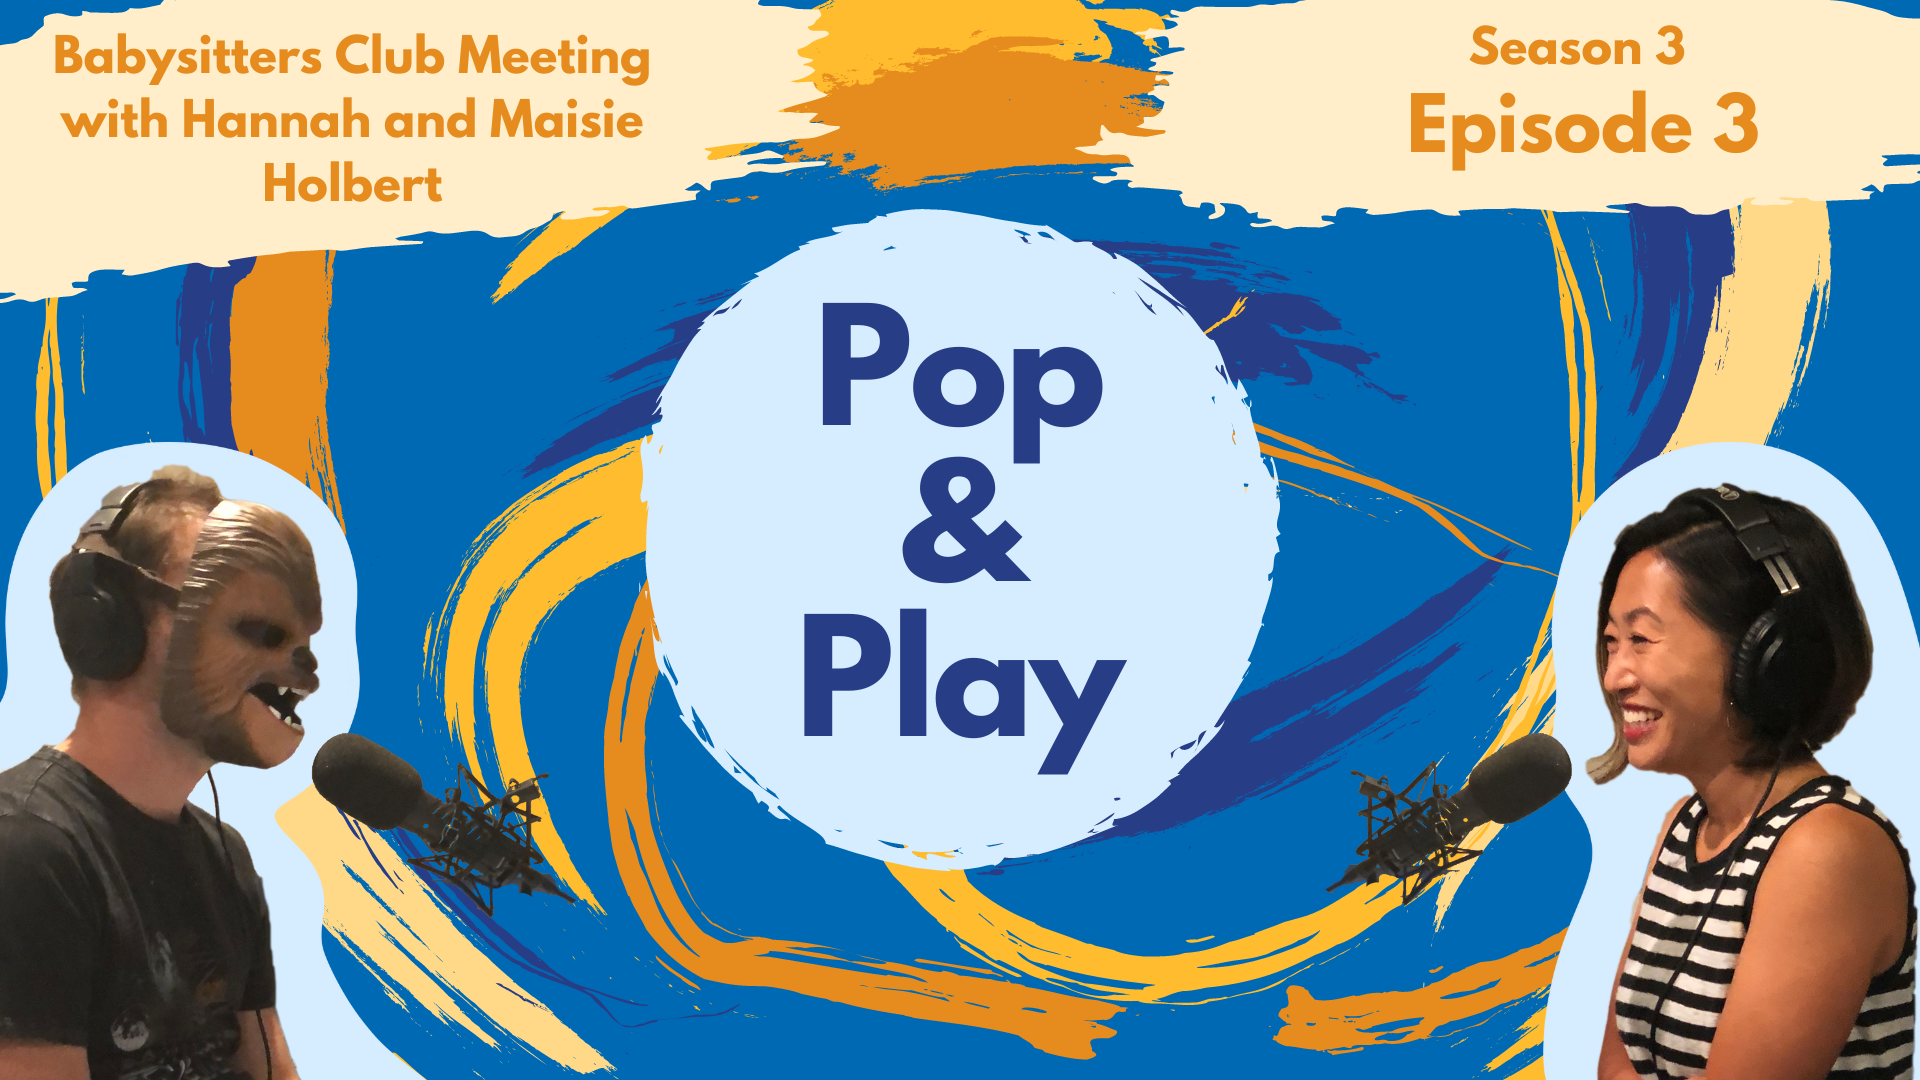 Pop and Play Season 3 Episode 3 image with logo